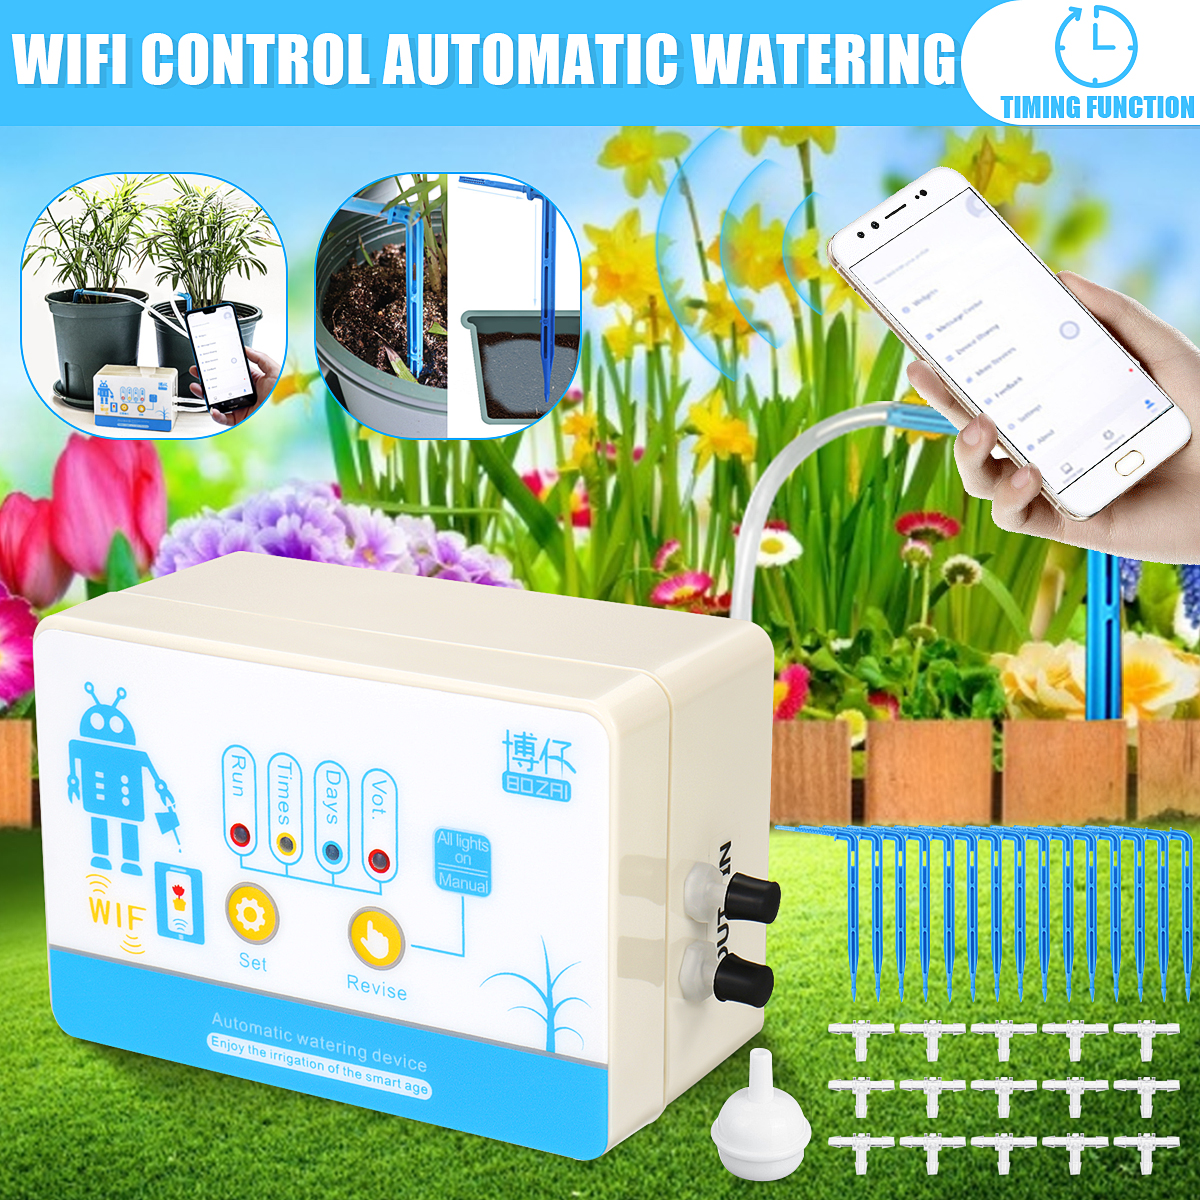 Wifi-Control-Automatic-Watering-Device-10m-Hose-Drip-Irrigation-Timing-System-1685242-2